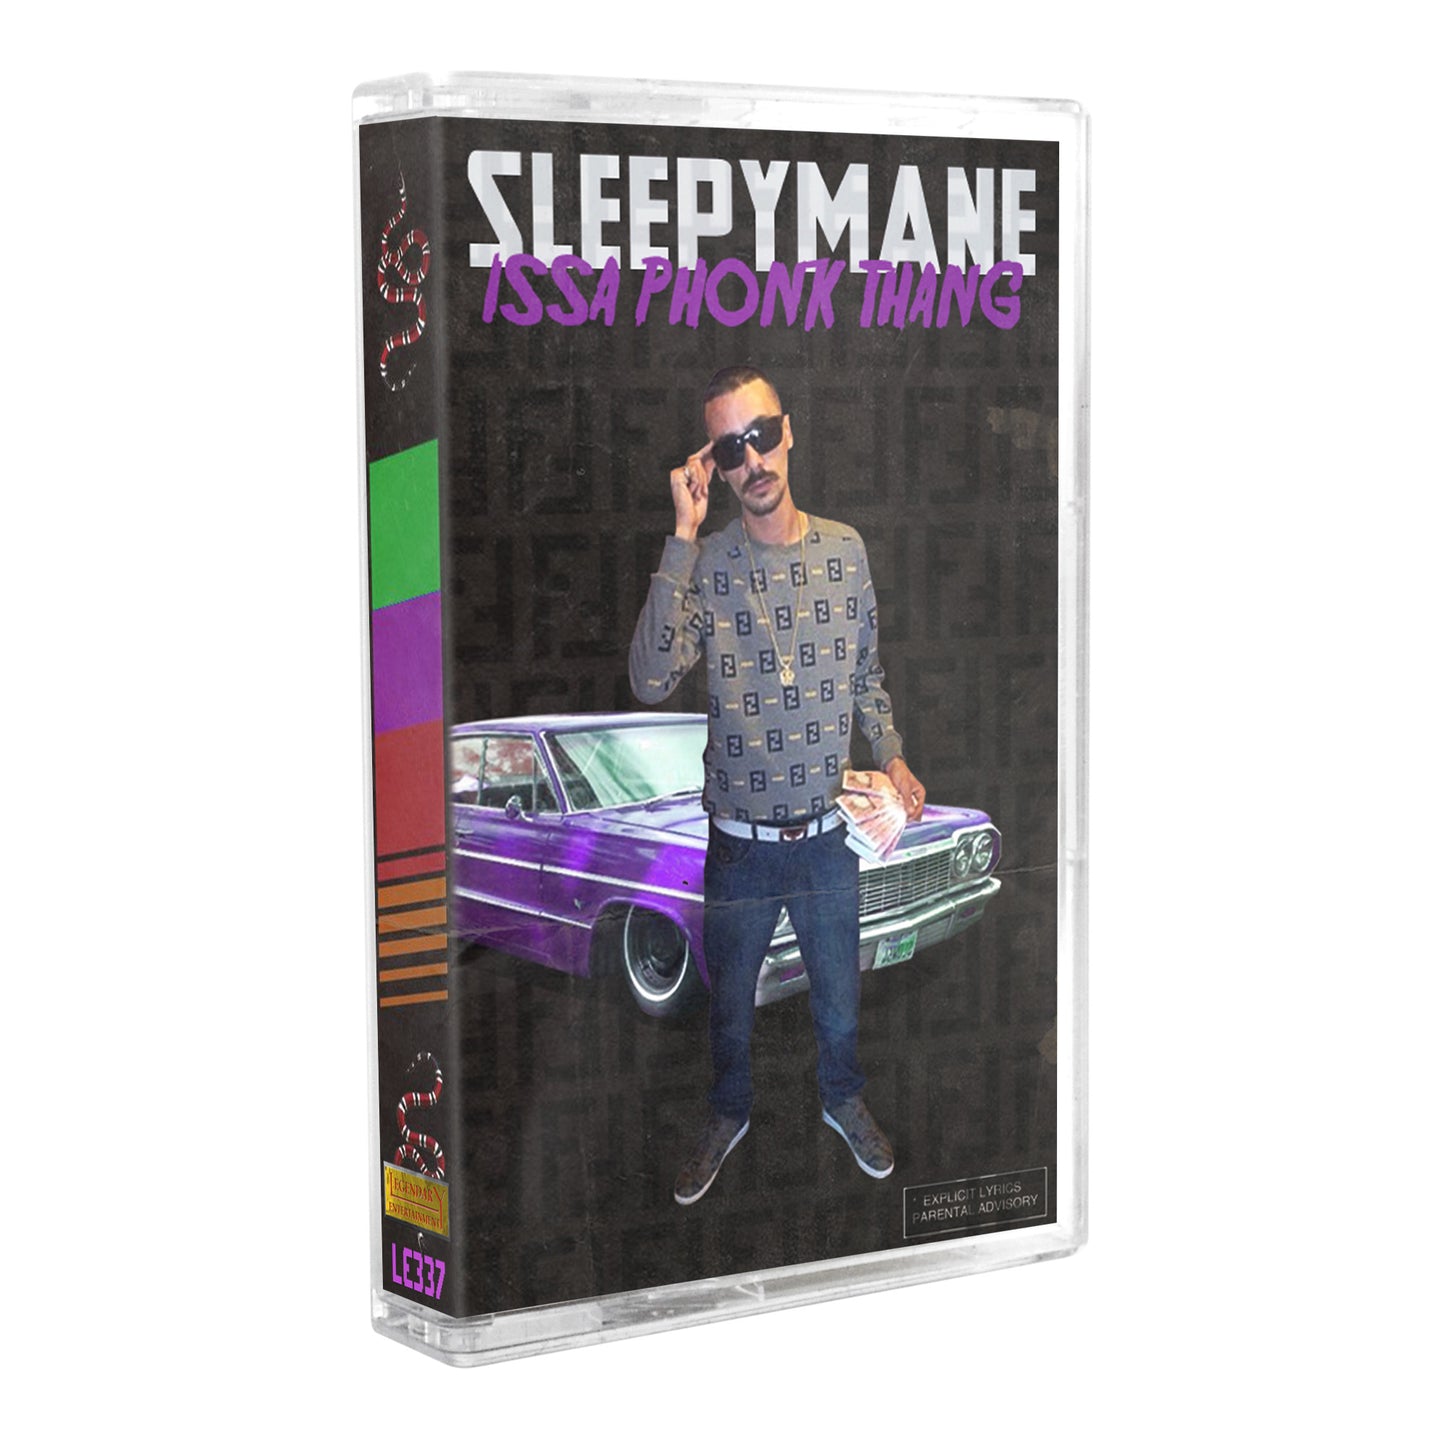 Sleepy Mane - "Issa Phonk Thang" Limited Edition Cassette Tape